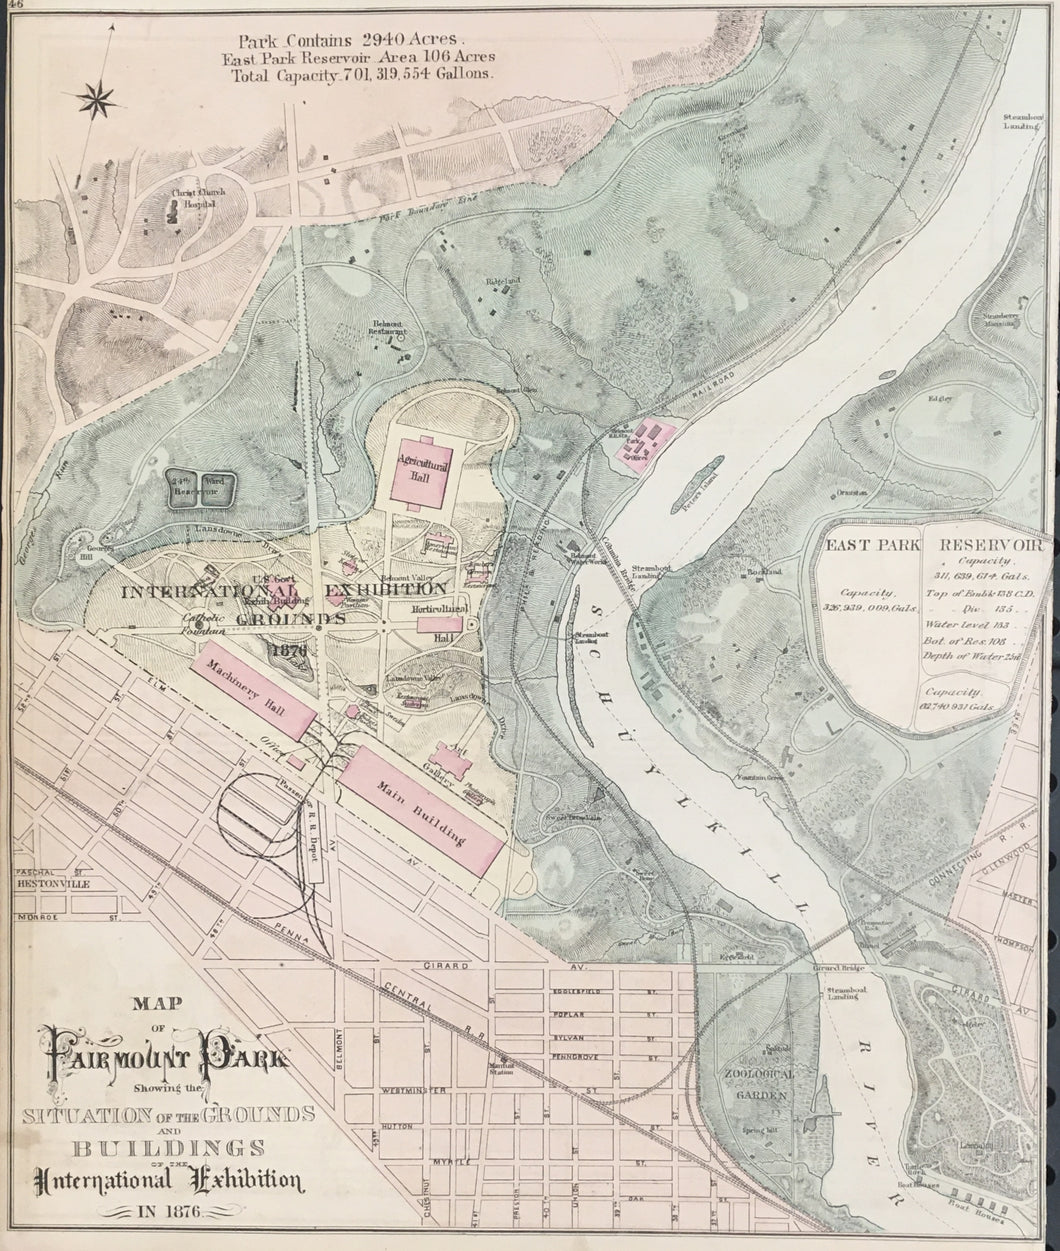 Scott, J.D.  “Map of Fairmount Park Showing the Situation of the Grounds and Buildings of the International Exhibition in 1876